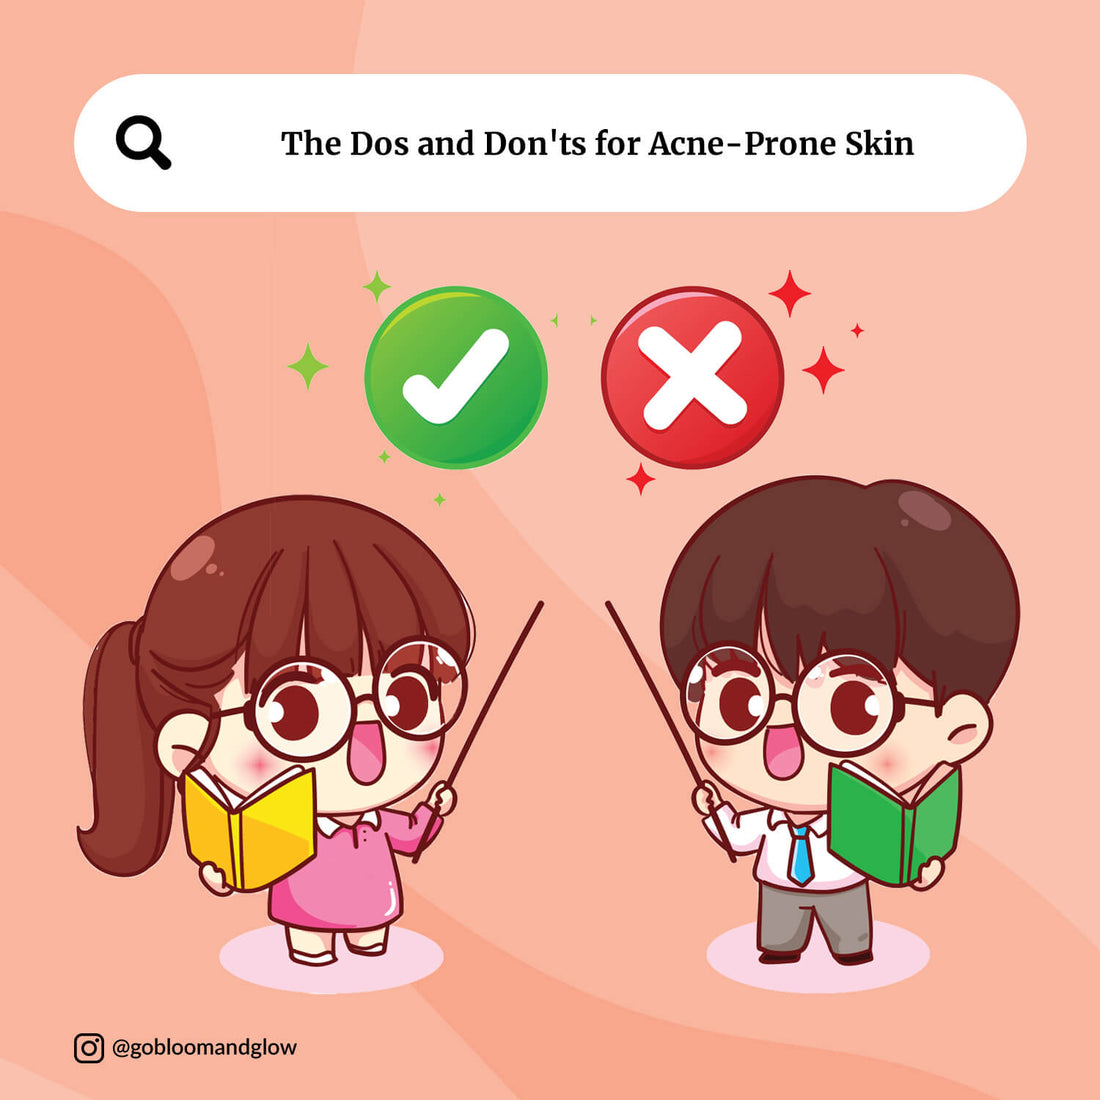 The Dos and Don'ts for Acne-Prone Skin